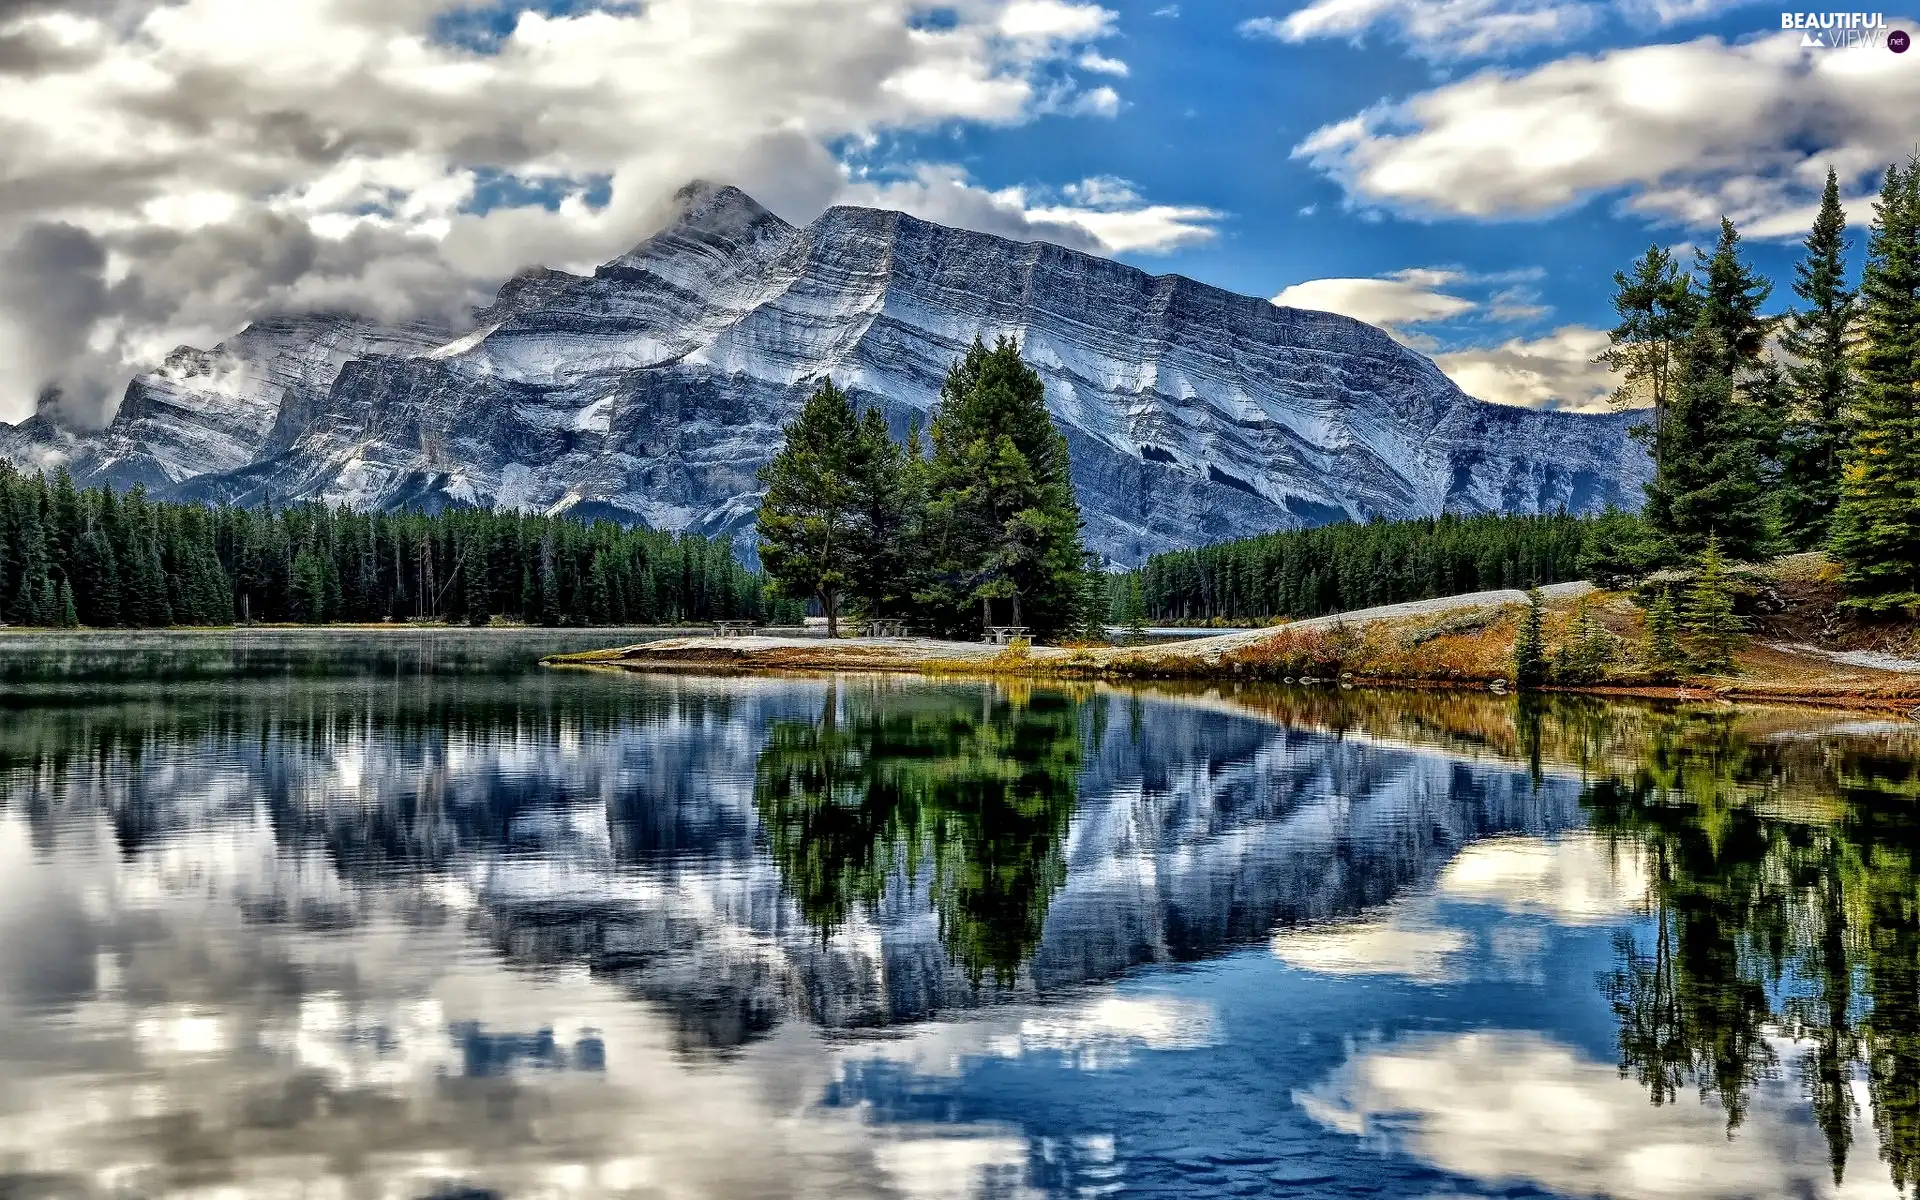 Canada, Banff National Park, Mountains, Mount Rundle, trees, viewes, Two Jack Lake, reflection, woods